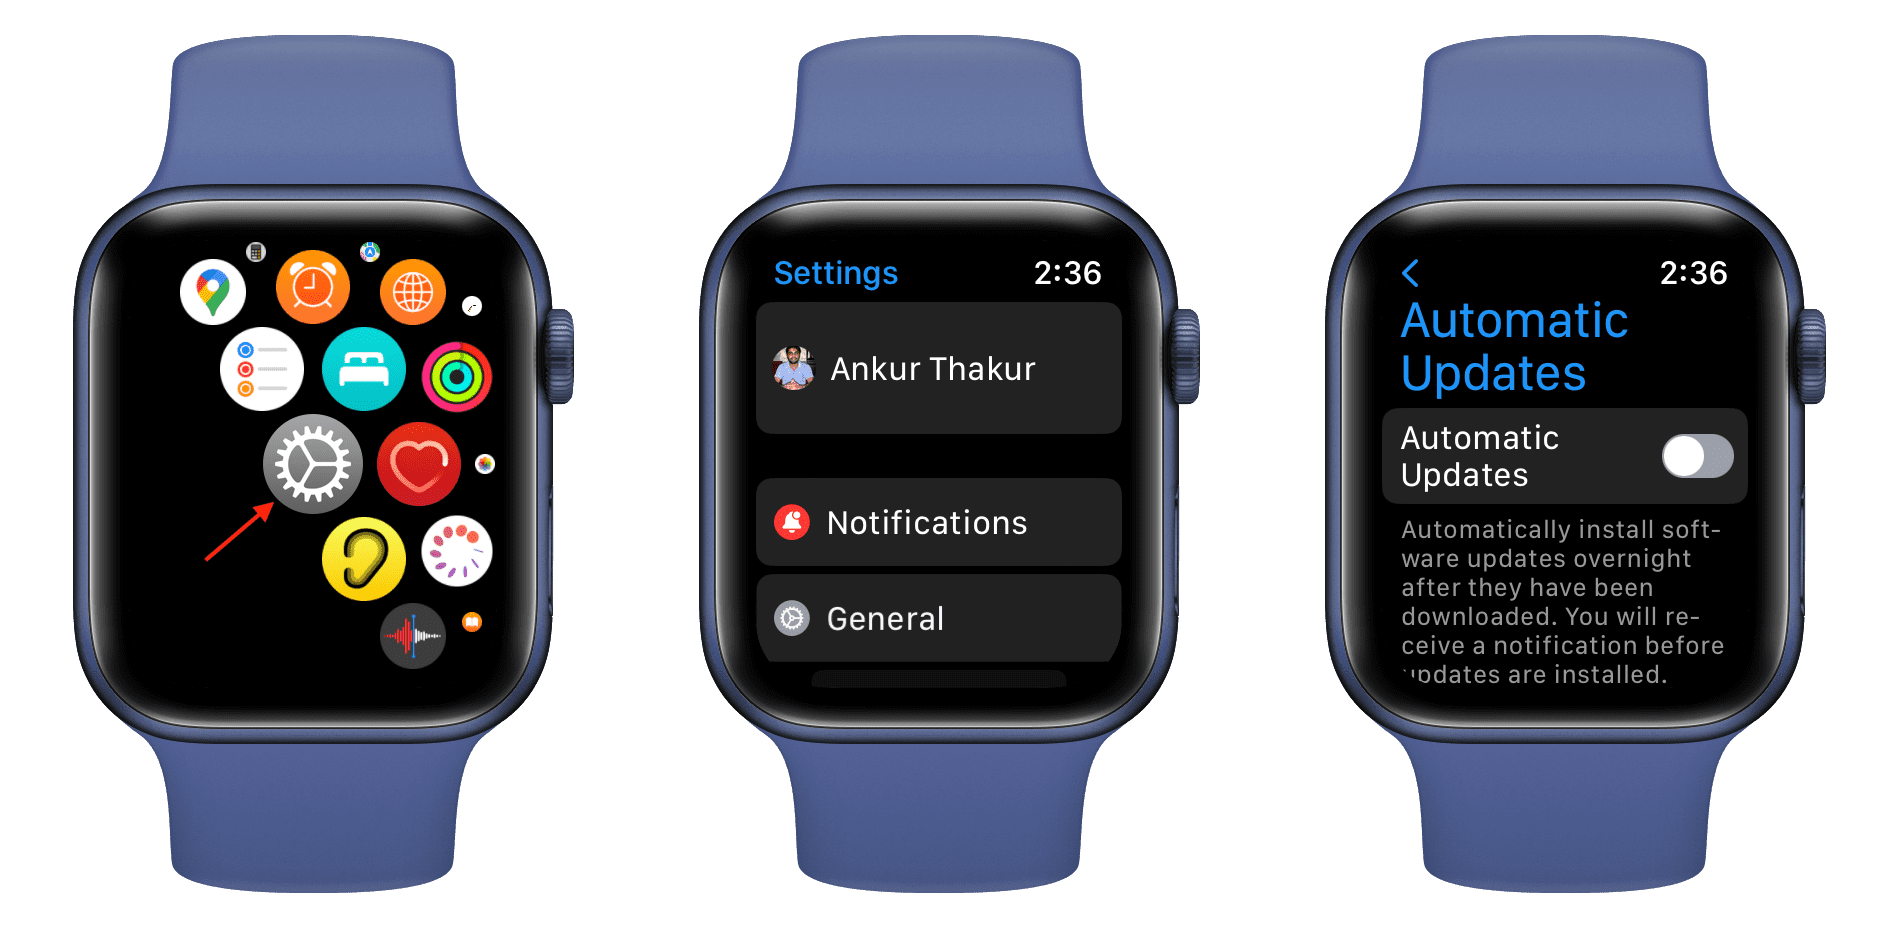 Turn off Automatic Updates from Apple Watch settings